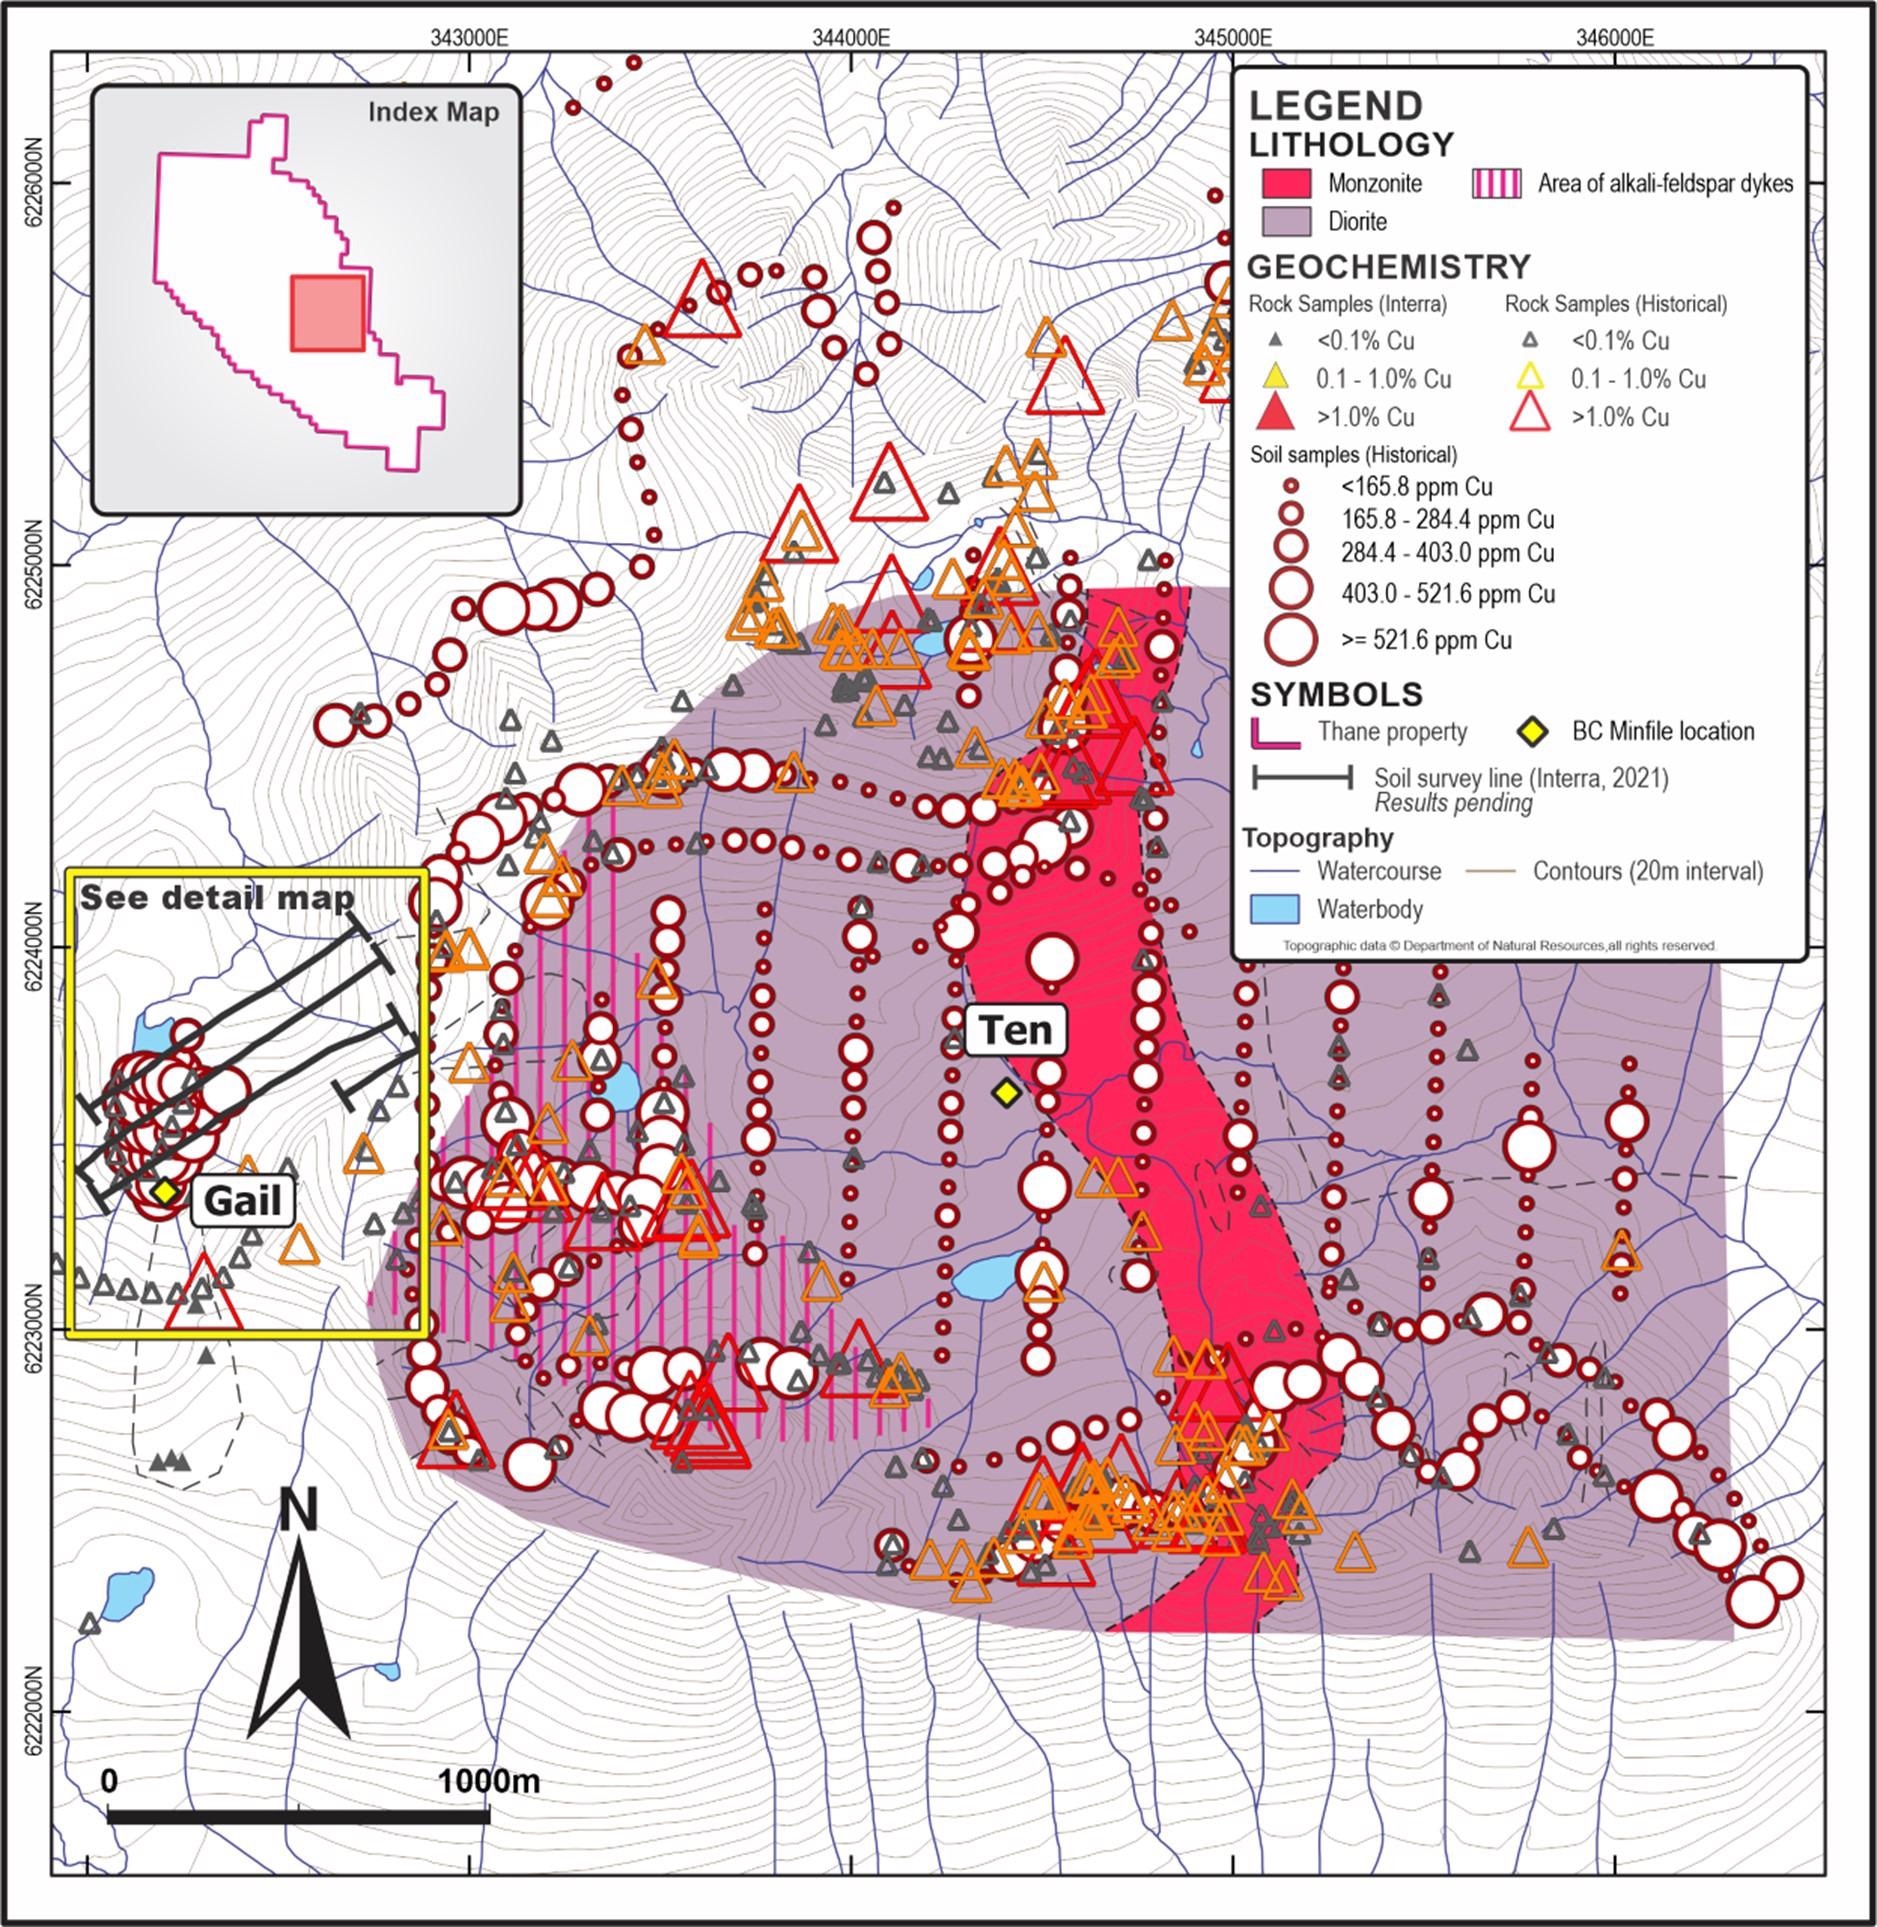 Interra Completes Ground Geophysical and Geochemical Work at its Thane Property